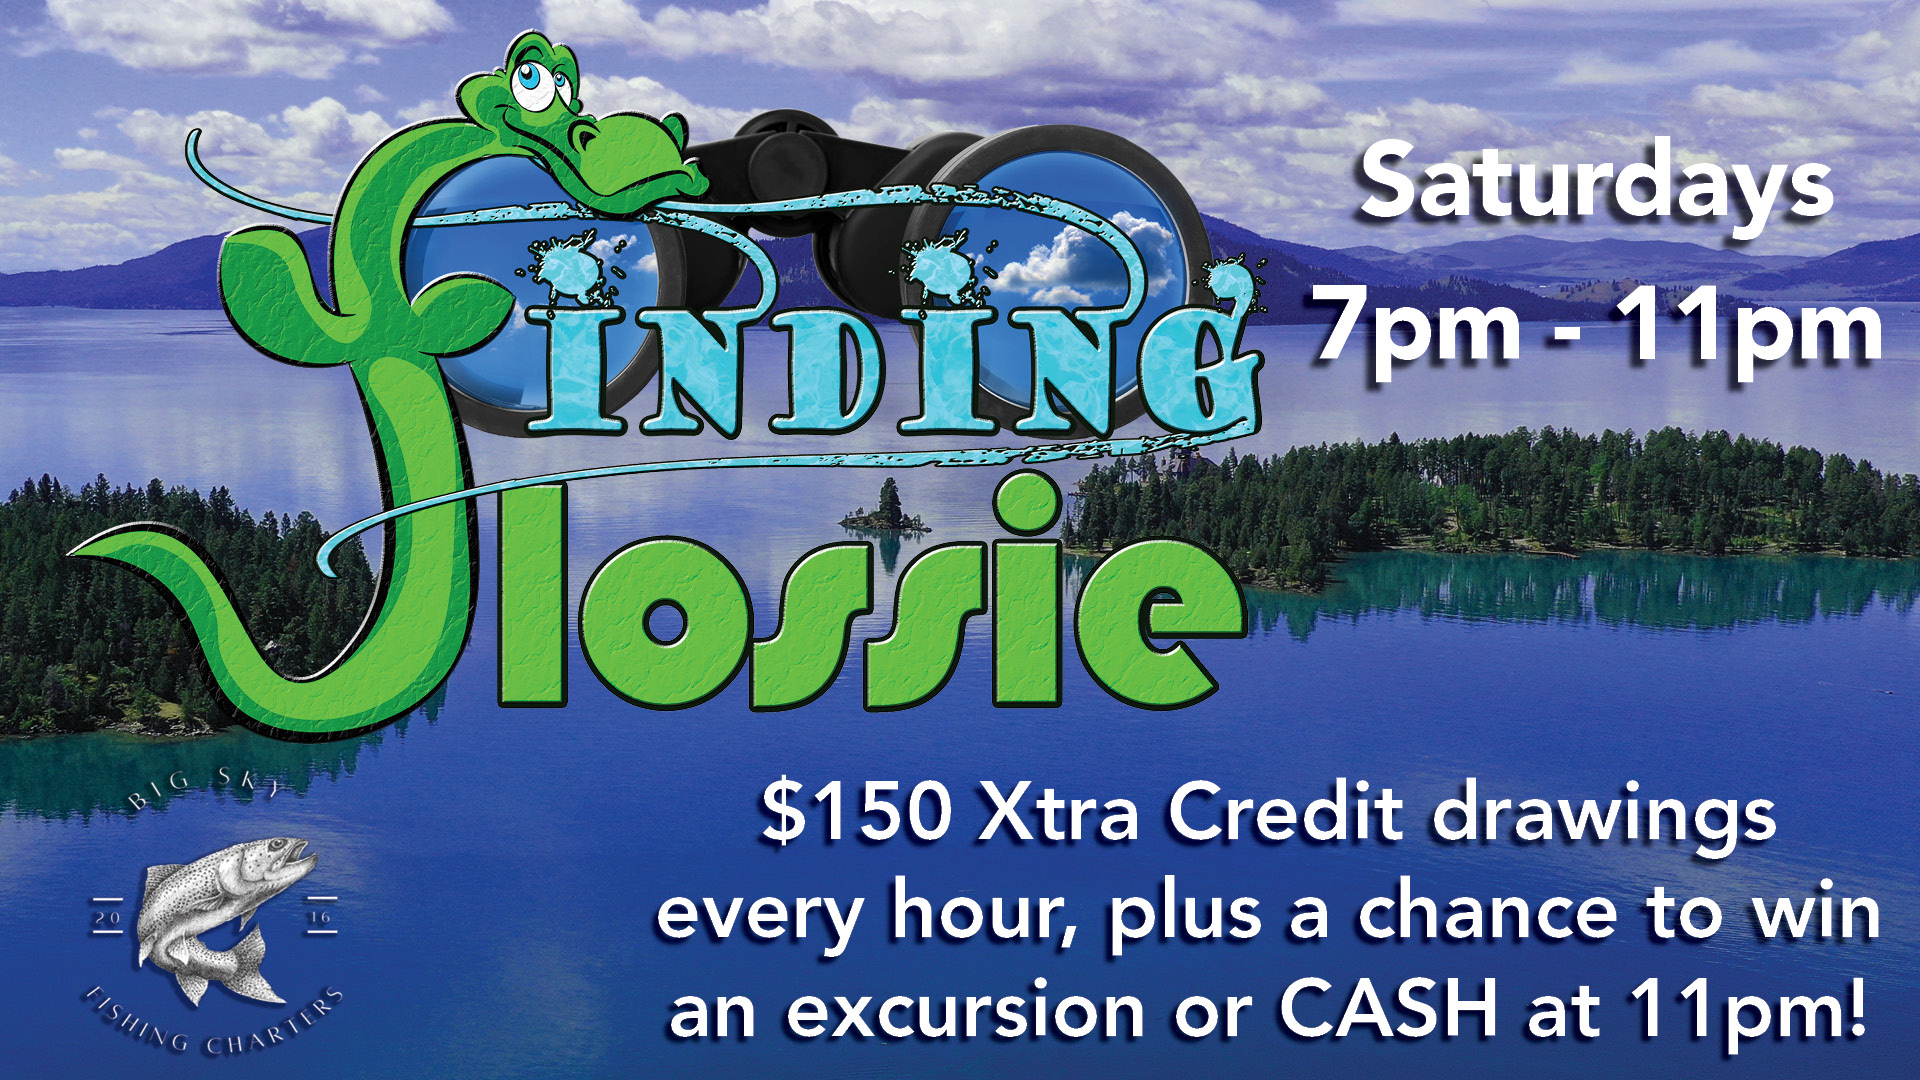 Finding Flossie, Flossie Challenge, Nessie, finding nessie, flathead lake monster, Lochness monster, casino promotion, kwataqnuk promotion, Xtra Credit, cash, cash promotion, cash drawing, drawings, fishing charter, fishing excursion